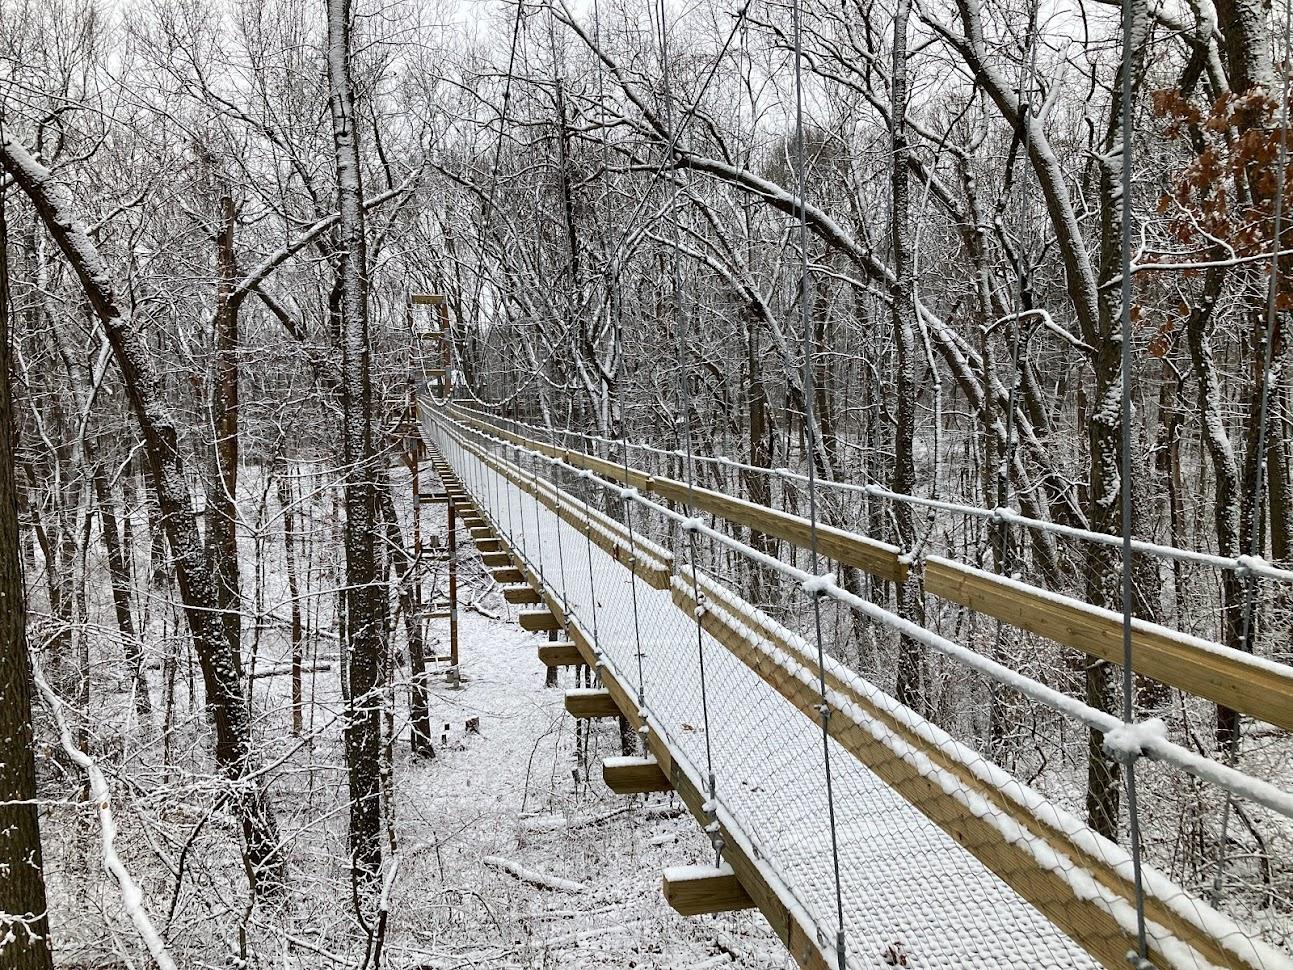 Canopy walk in winter, covered in a dusting of snow